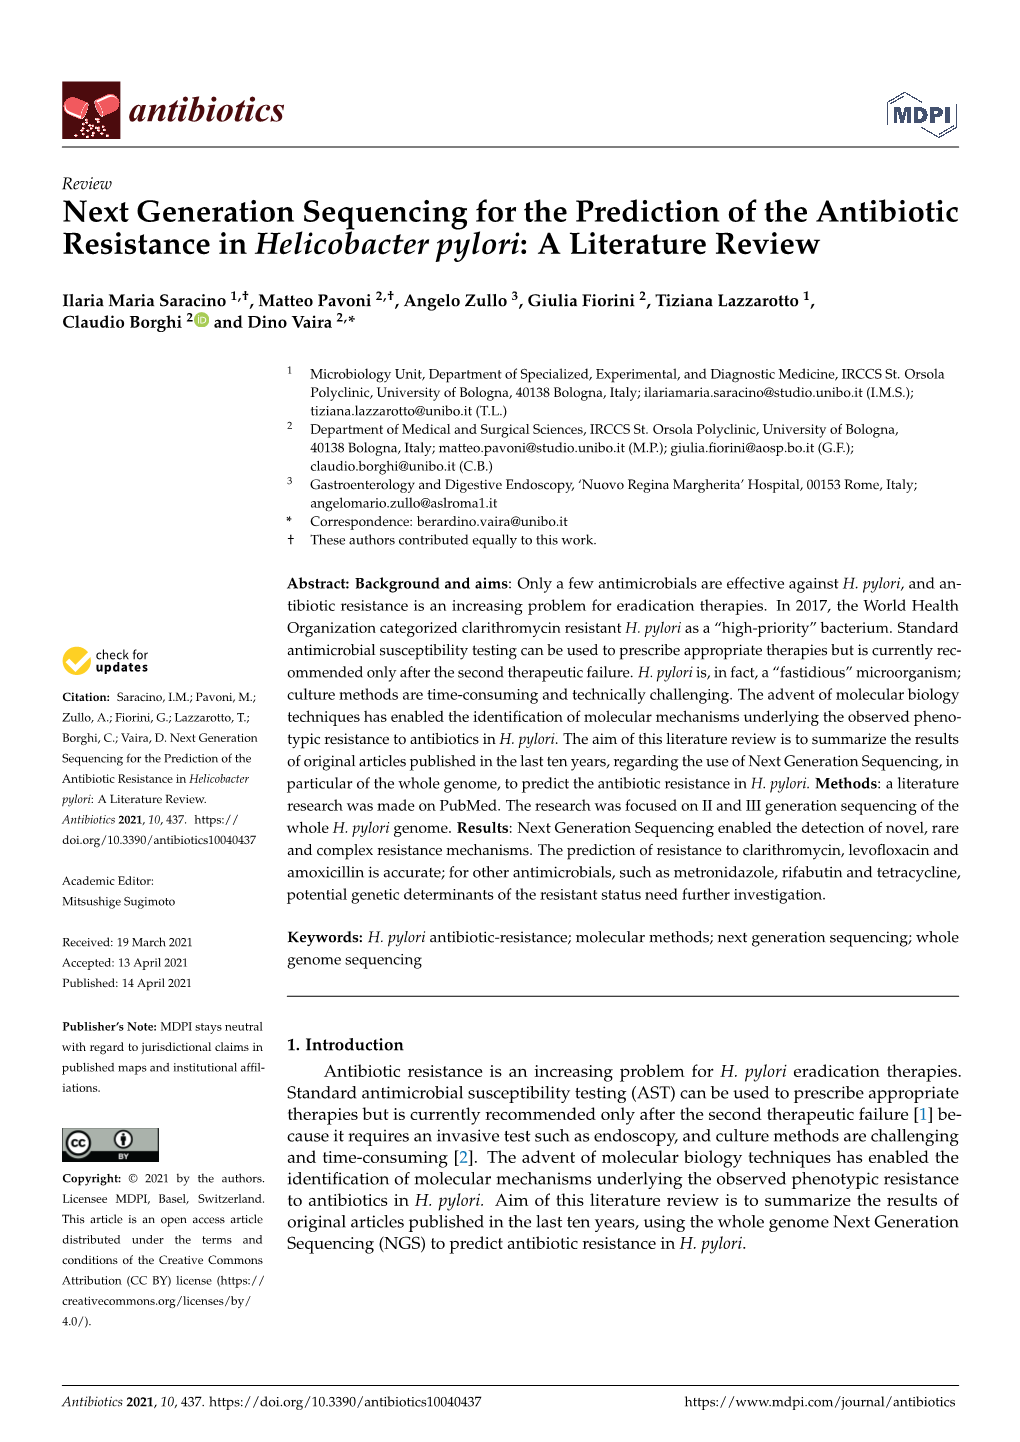 Next Generation Sequencing for the Prediction of the Antibiotic Resistance in Helicobacter Pylori: a Literature Review